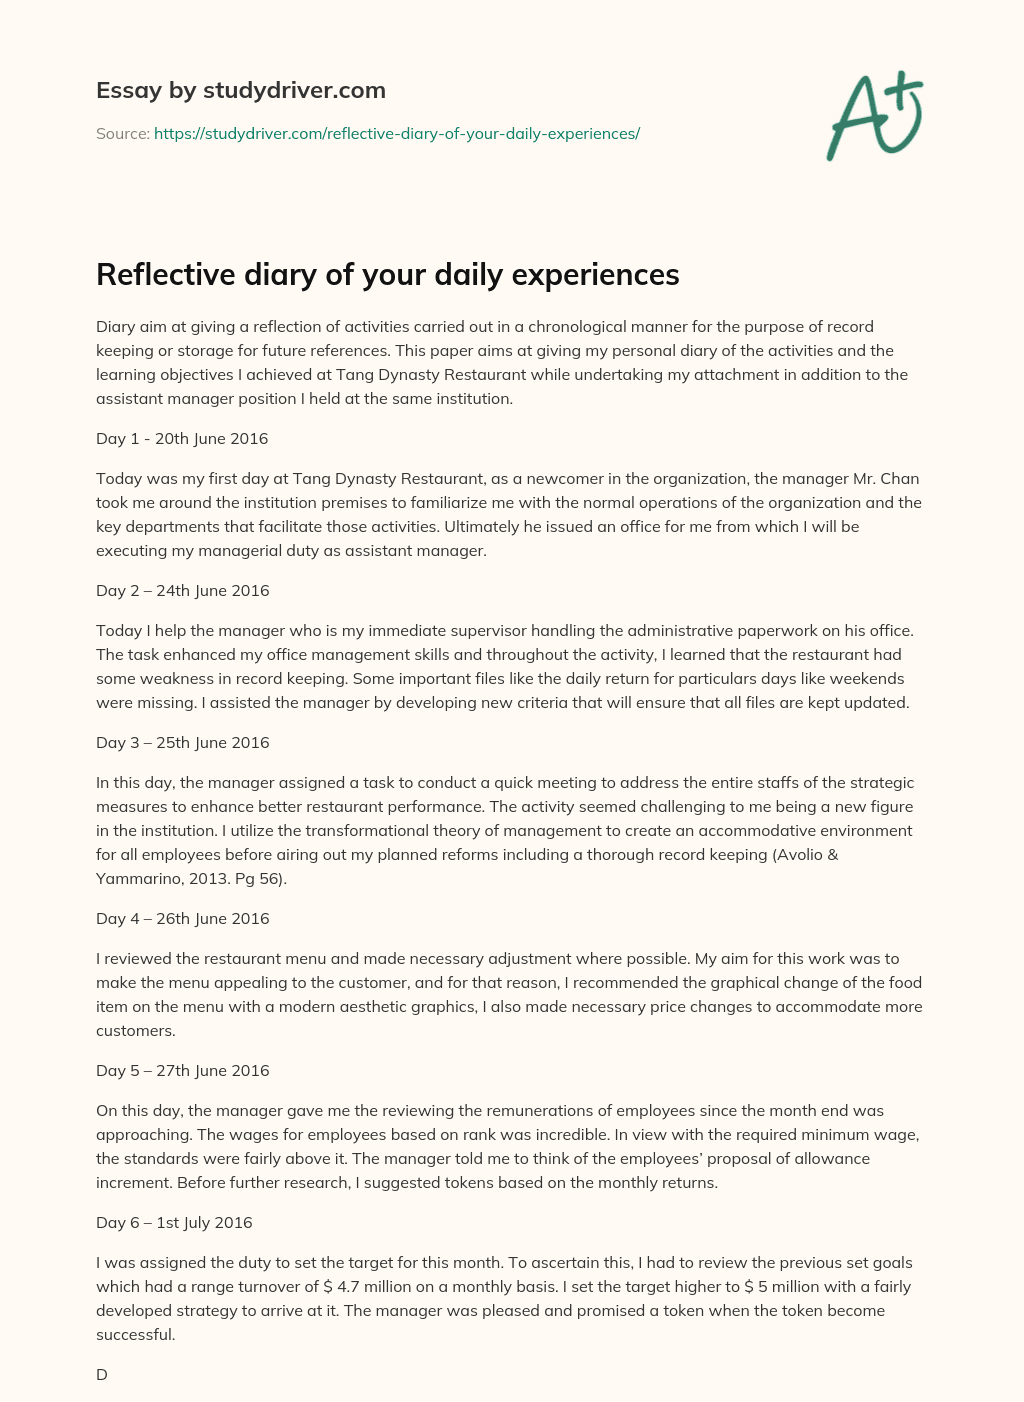 Reflective Diary of your Daily Experiences essay